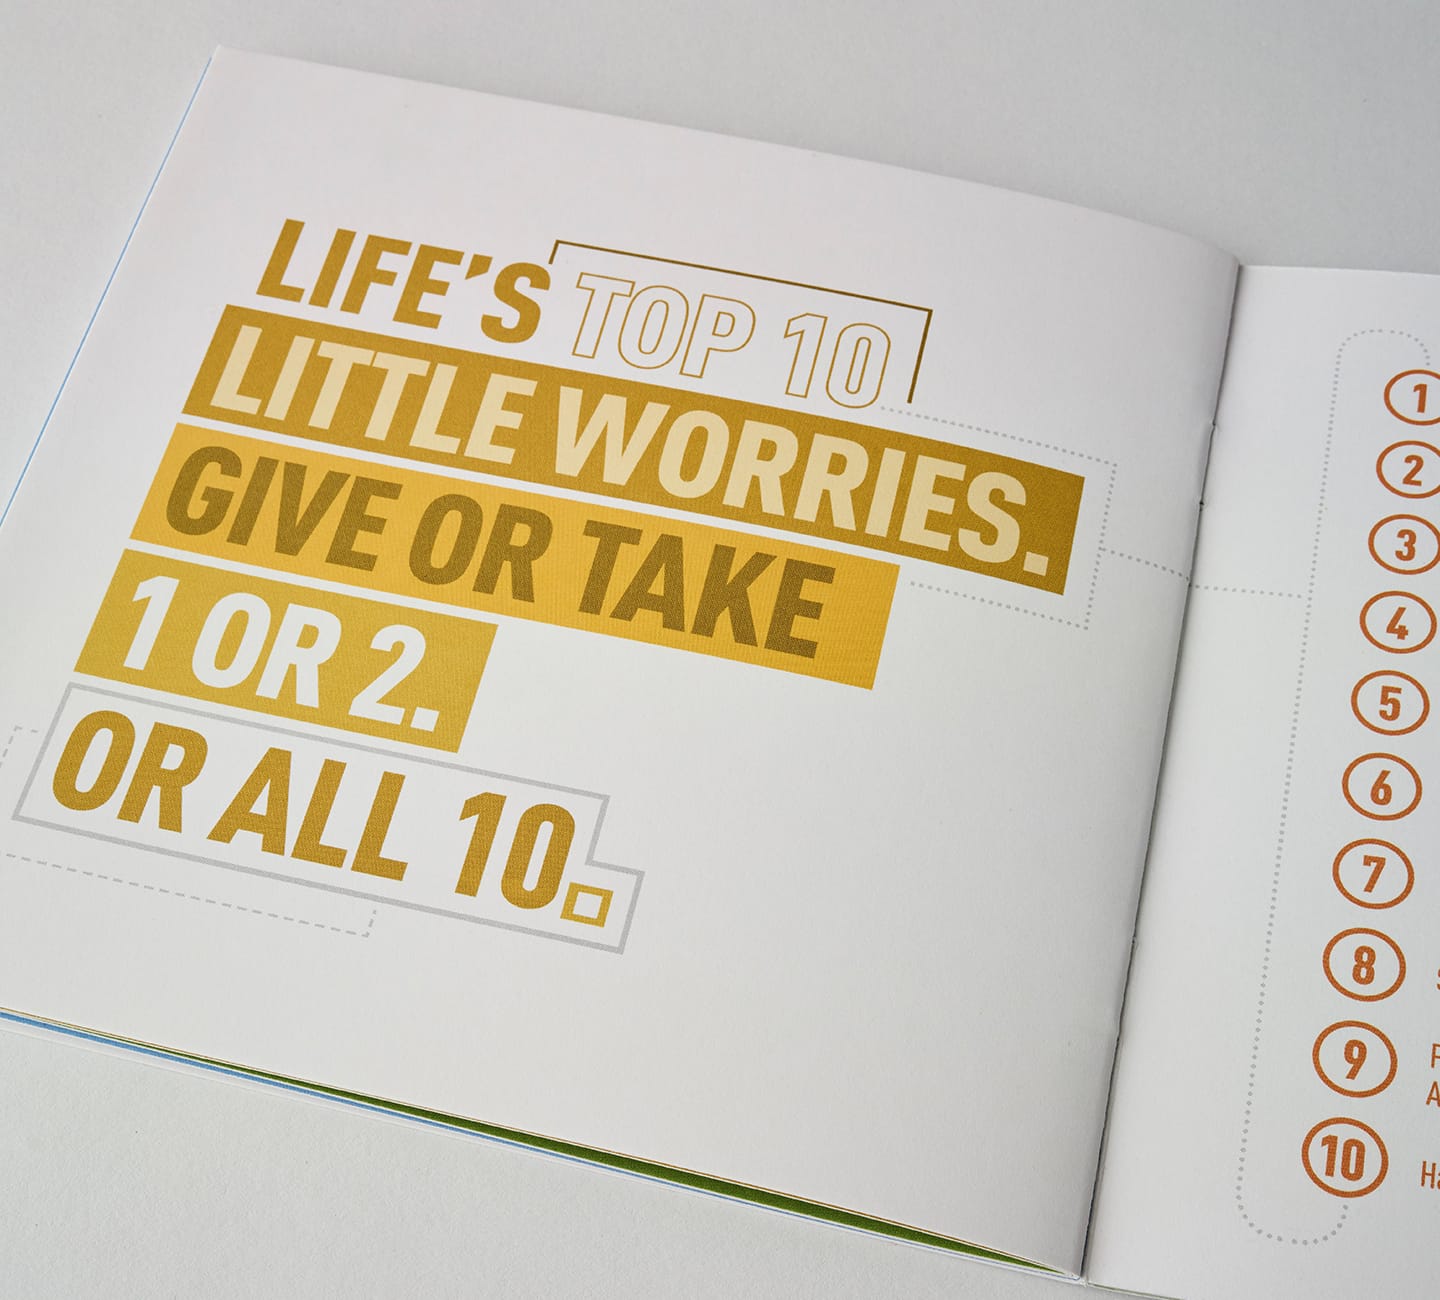 stressipies booklet for kfb law little worries